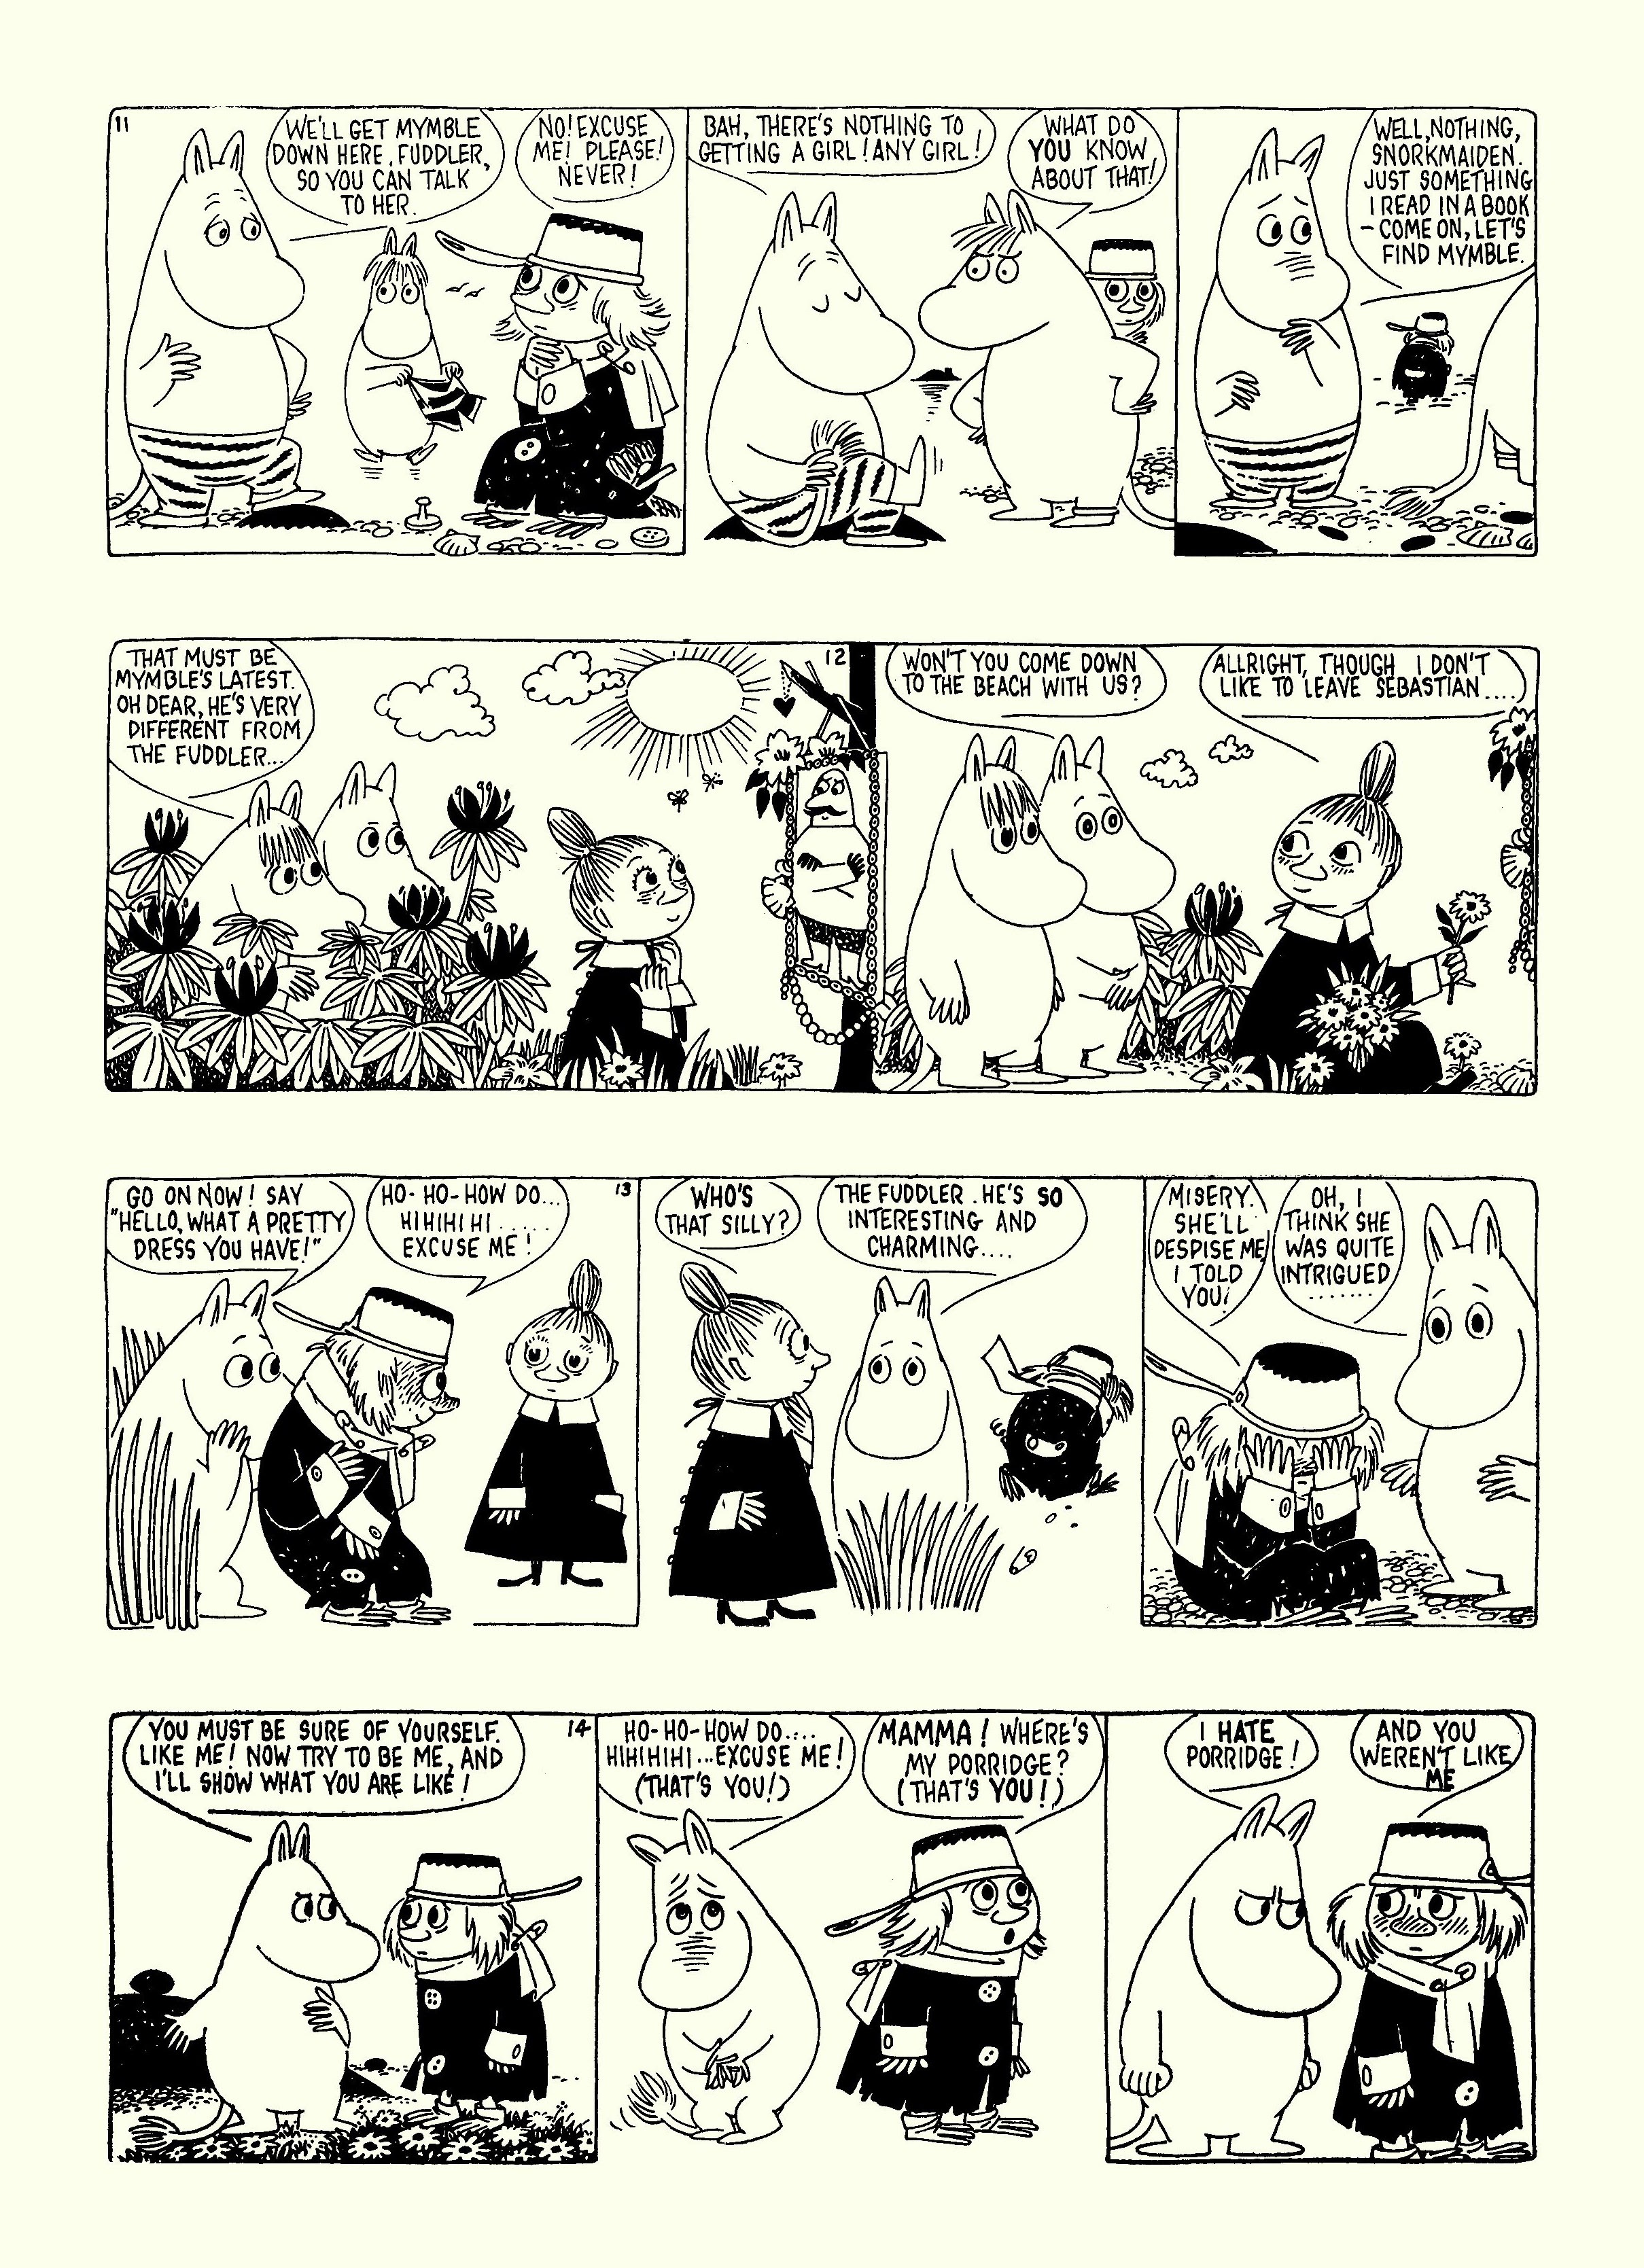 Read online Moomin: The Complete Tove Jansson Comic Strip comic -  Issue # TPB 5 - 60